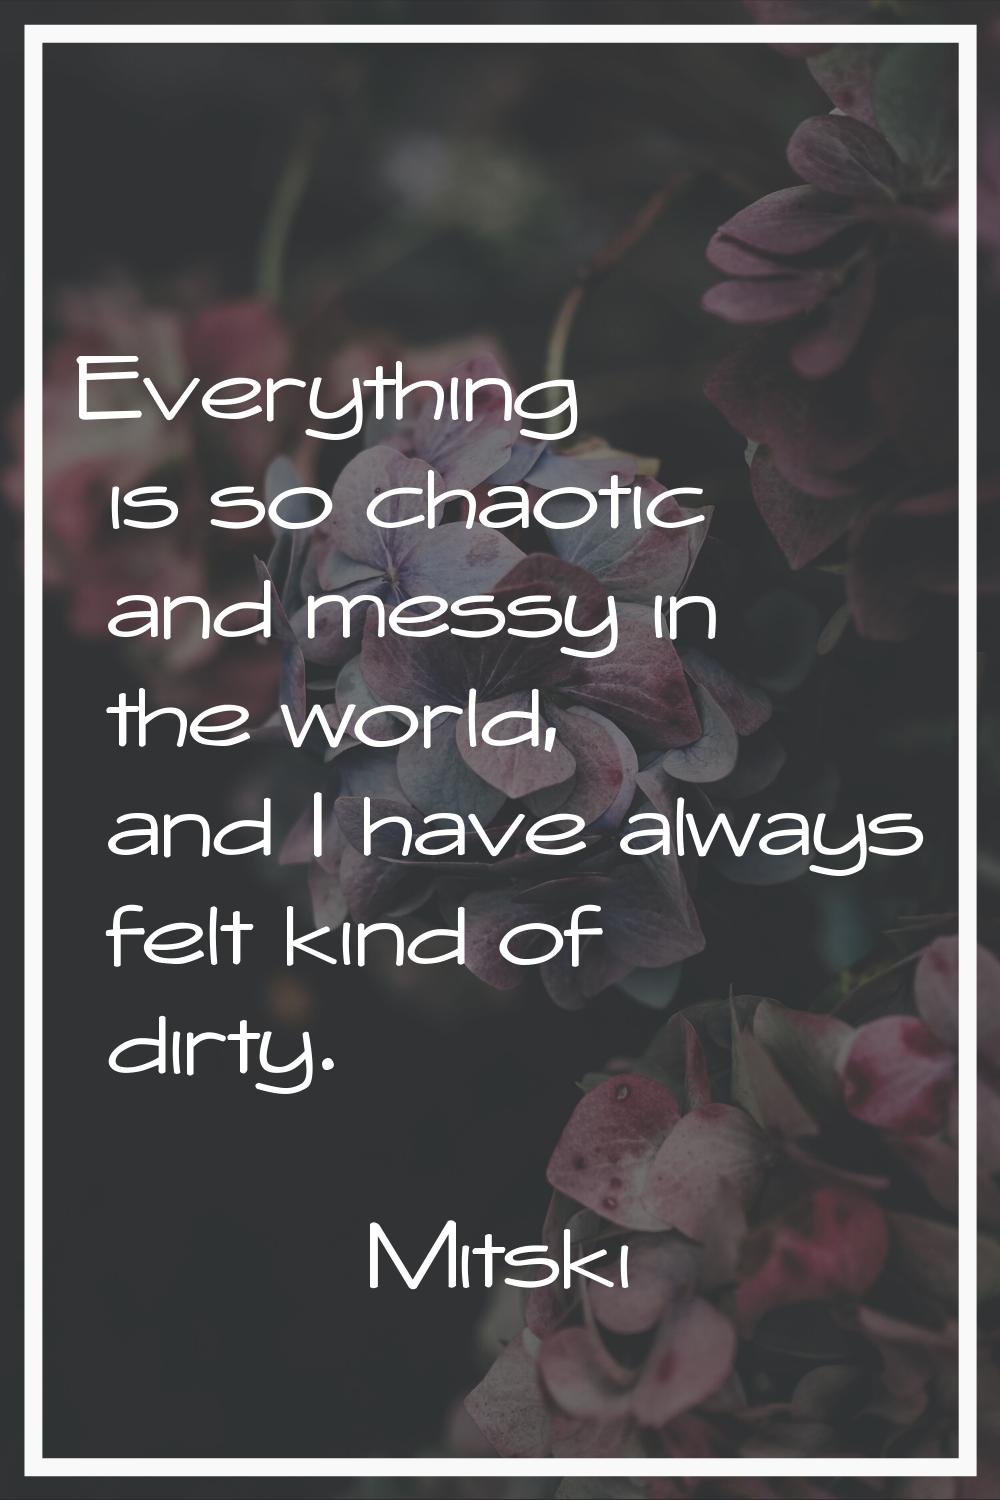 Everything is so chaotic and messy in the world, and I have always felt kind of dirty.